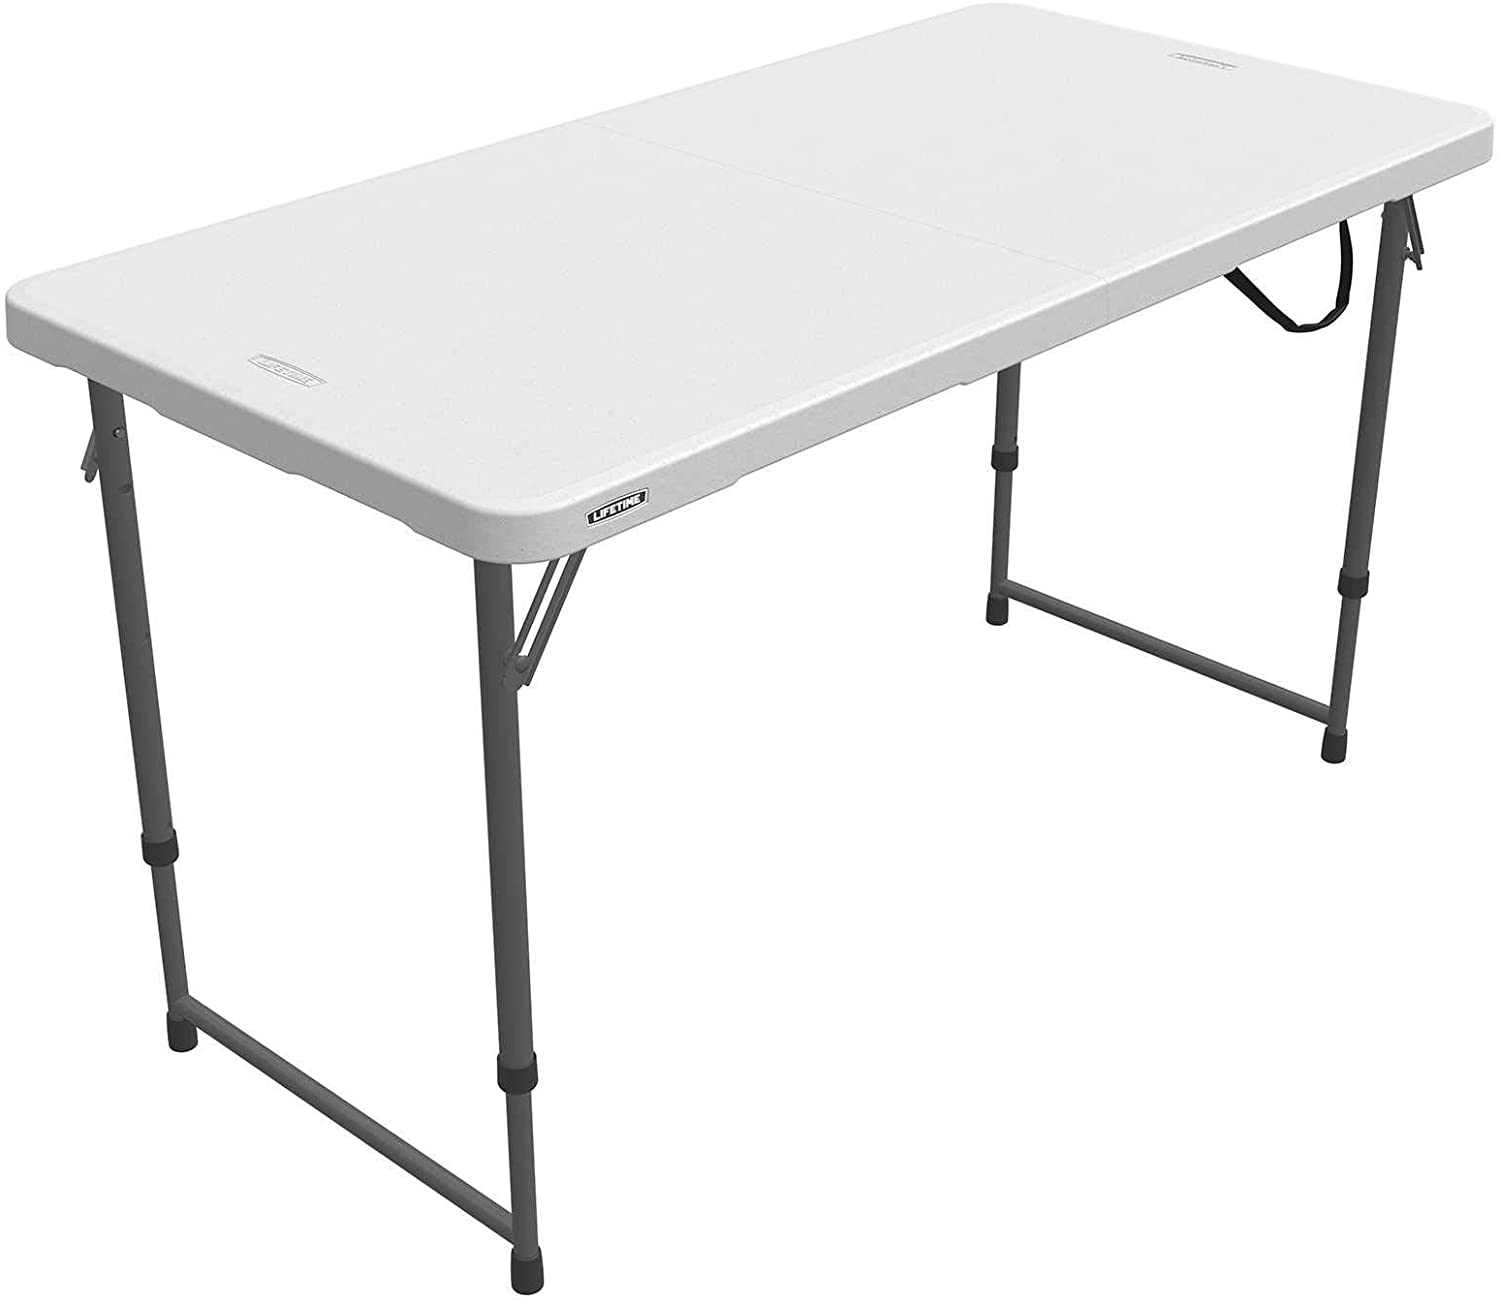 https://bigbigmart.com/wp-content/uploads/2022/07/Lifetime-Height-Adjustable-Craft-Camping-and-Utility-Folding-Table-4-Foot-448-x-24-White-Granite.jpg